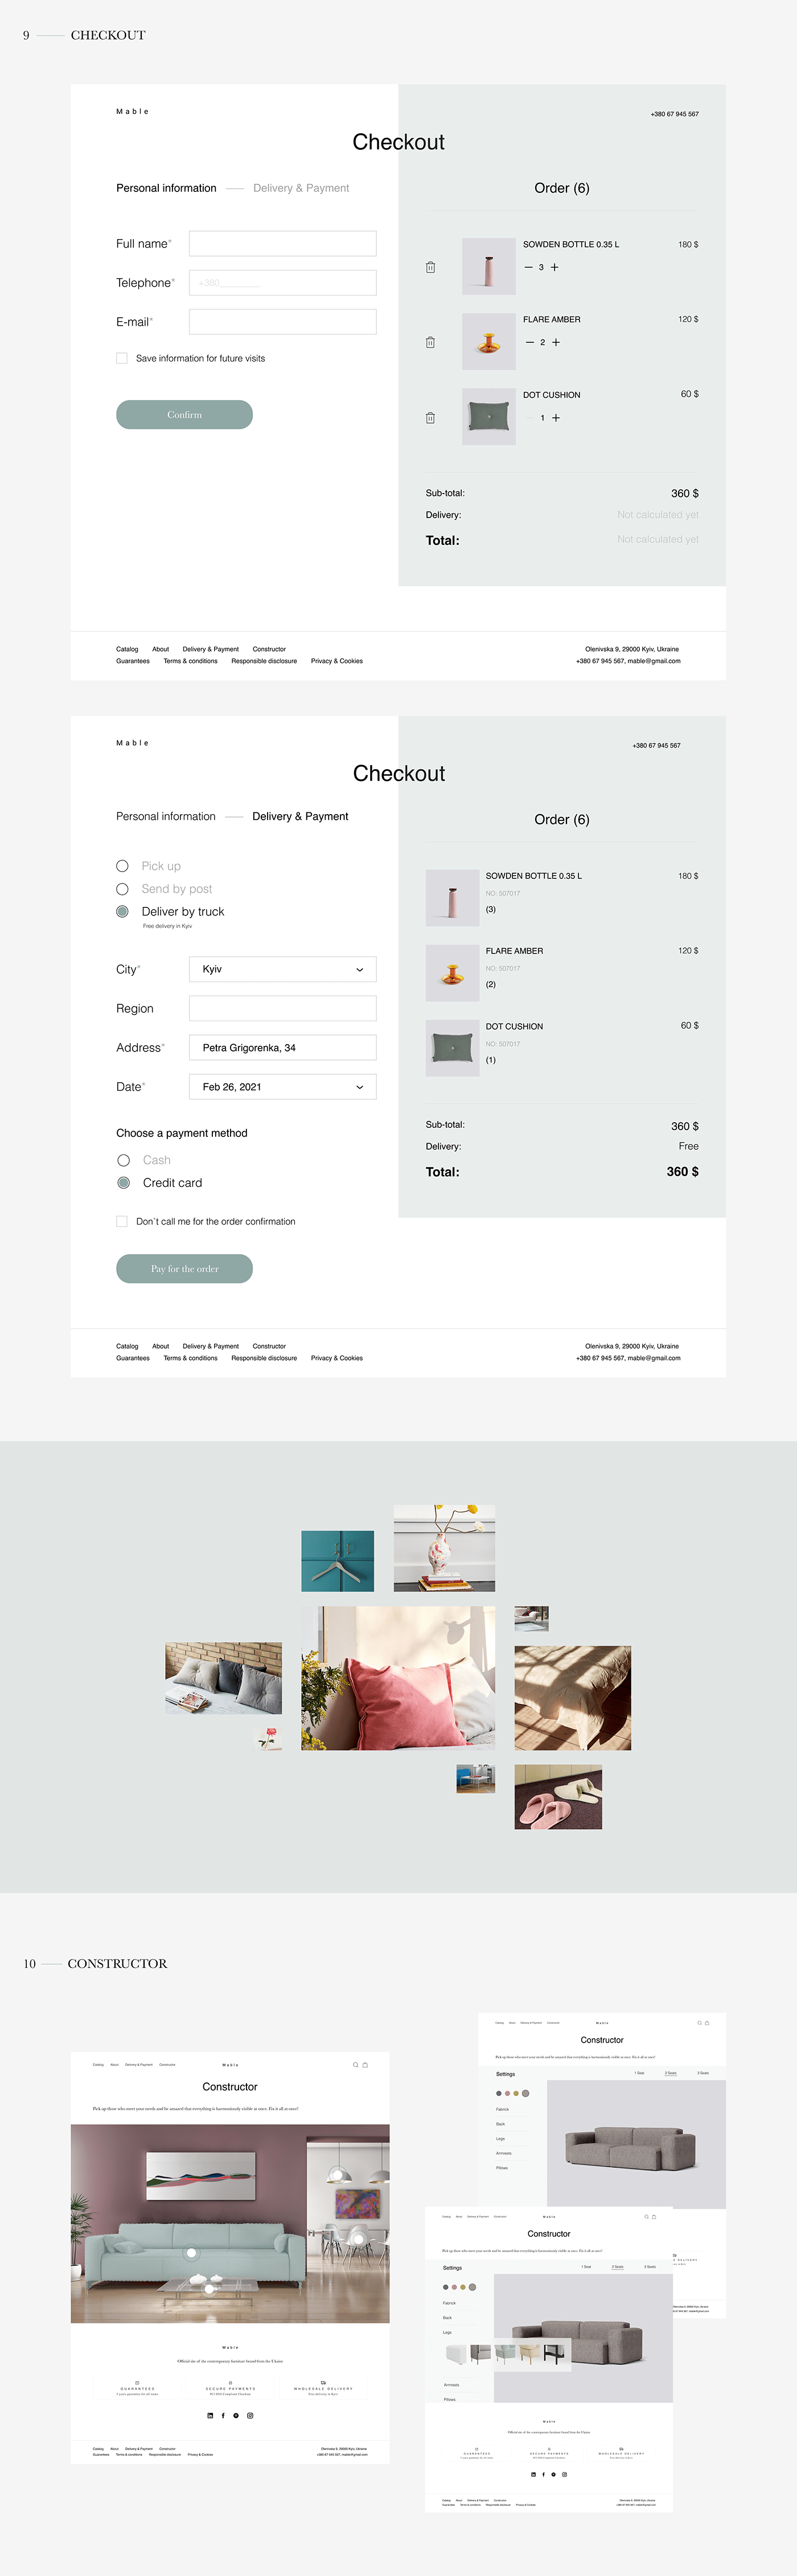 constrictor e-commerce furniture online store Style UI ux Web Webdesign